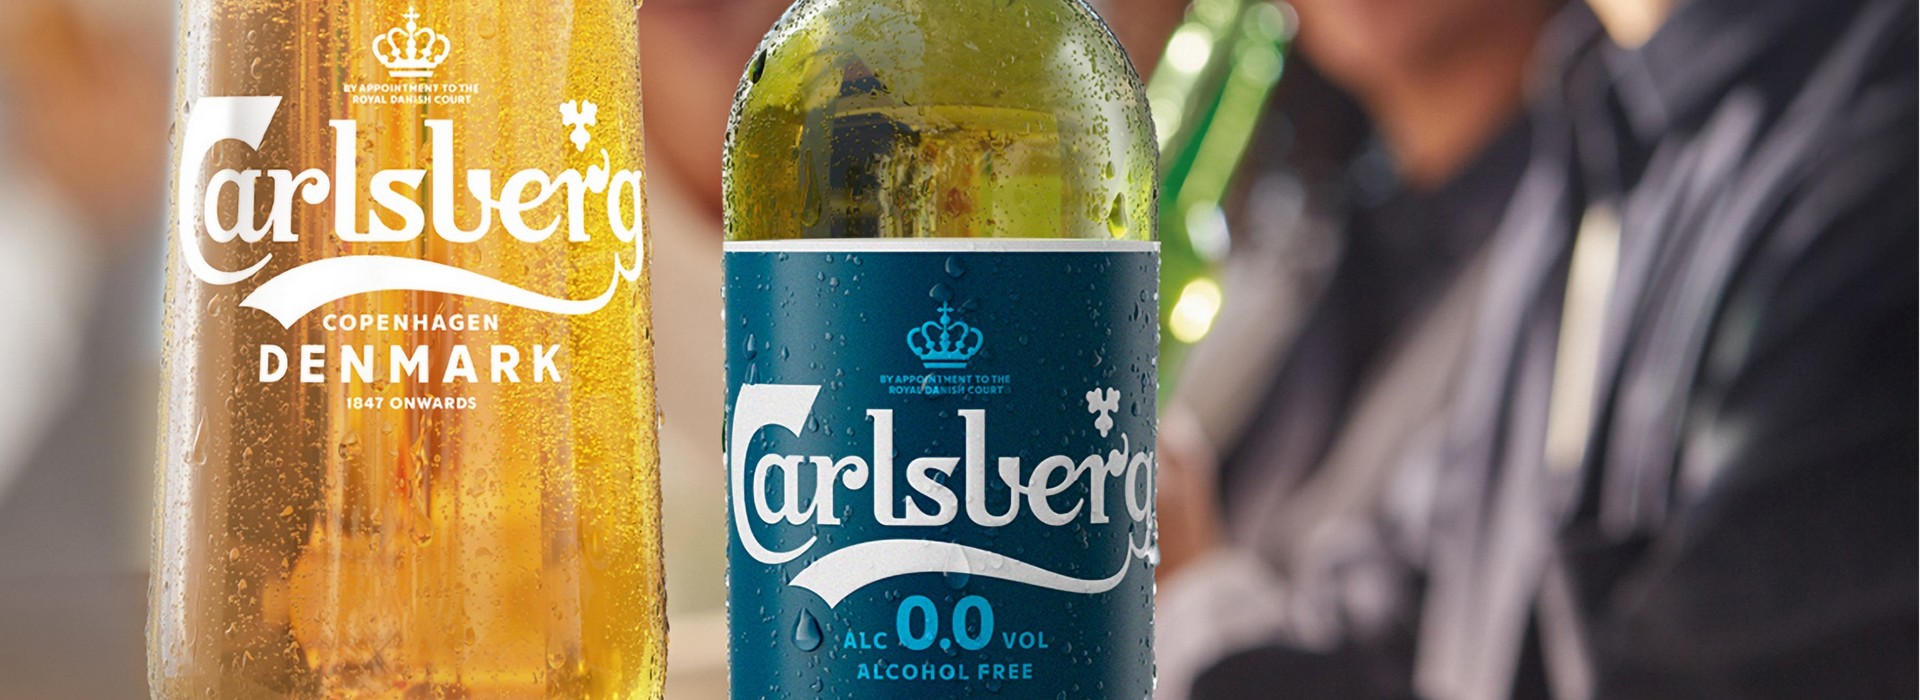 Carlsberg Group Has Reduced CO2 Emissions by 40% Since 2015: ESG Report 2021